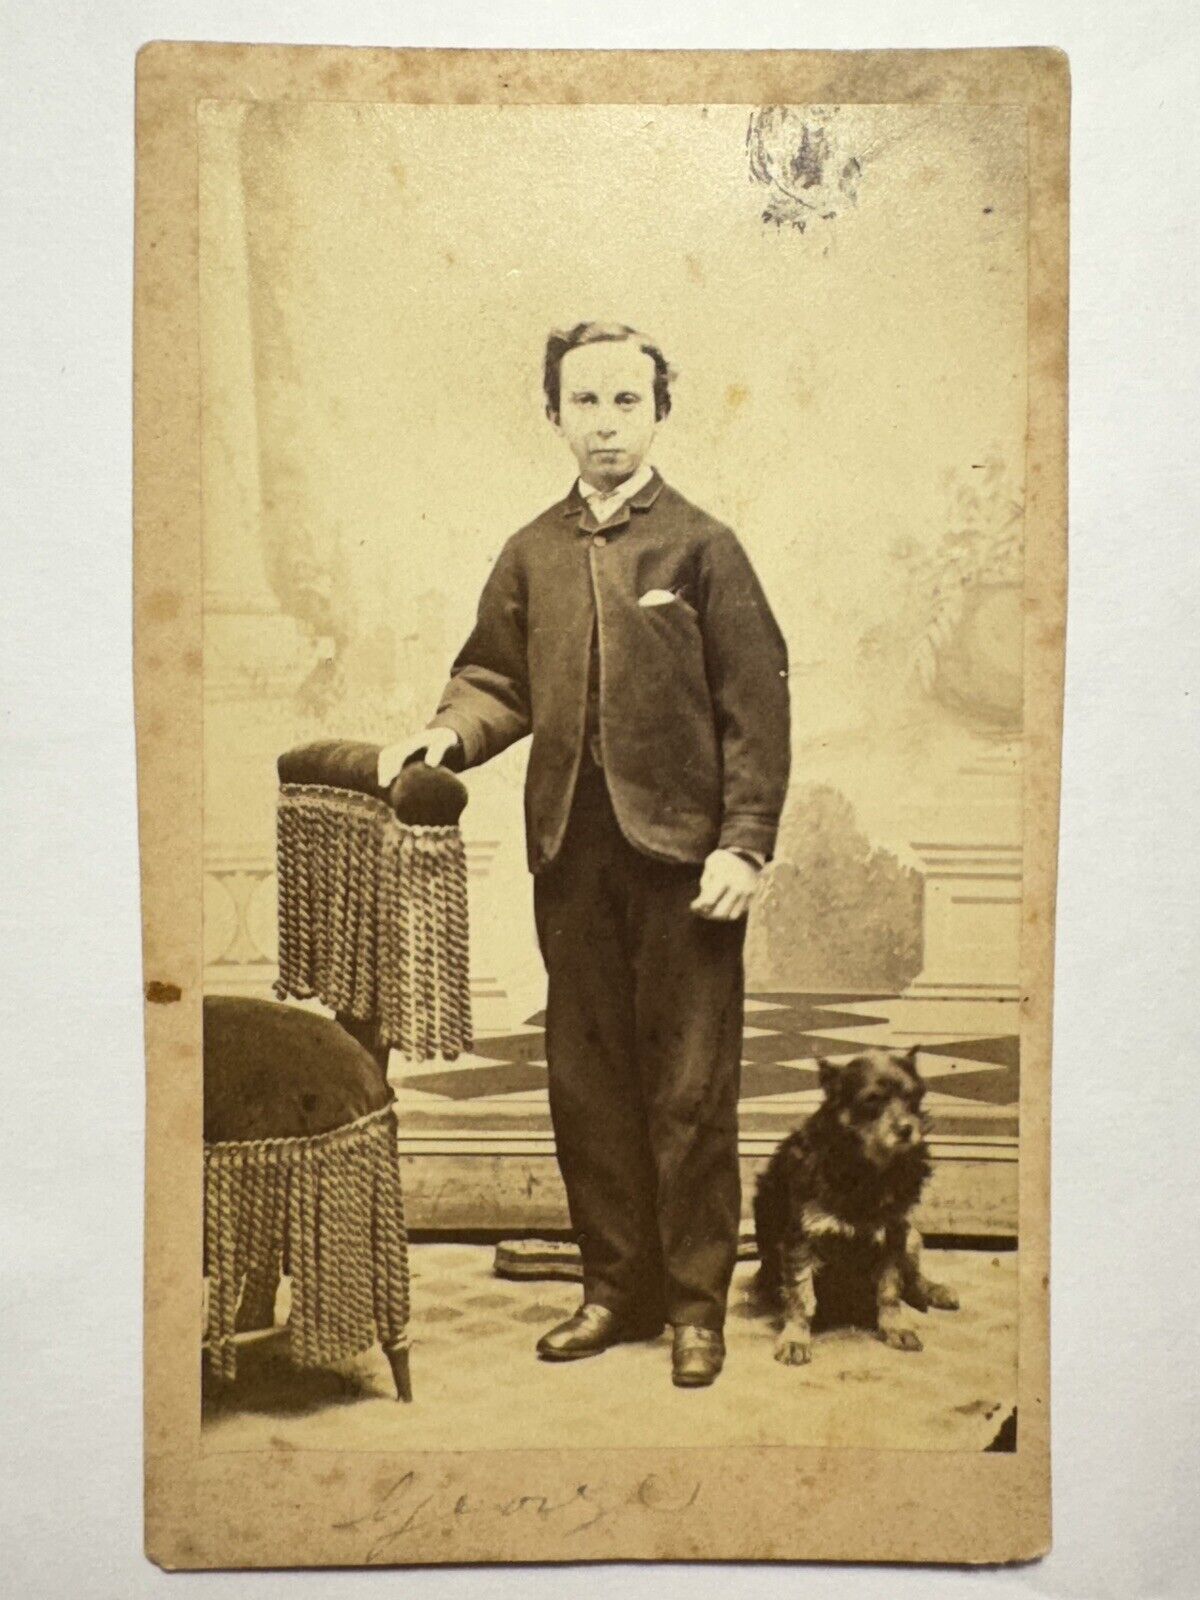 Antique CDV Photo - Victorian Boy “George” With Terrier Dog 1800s